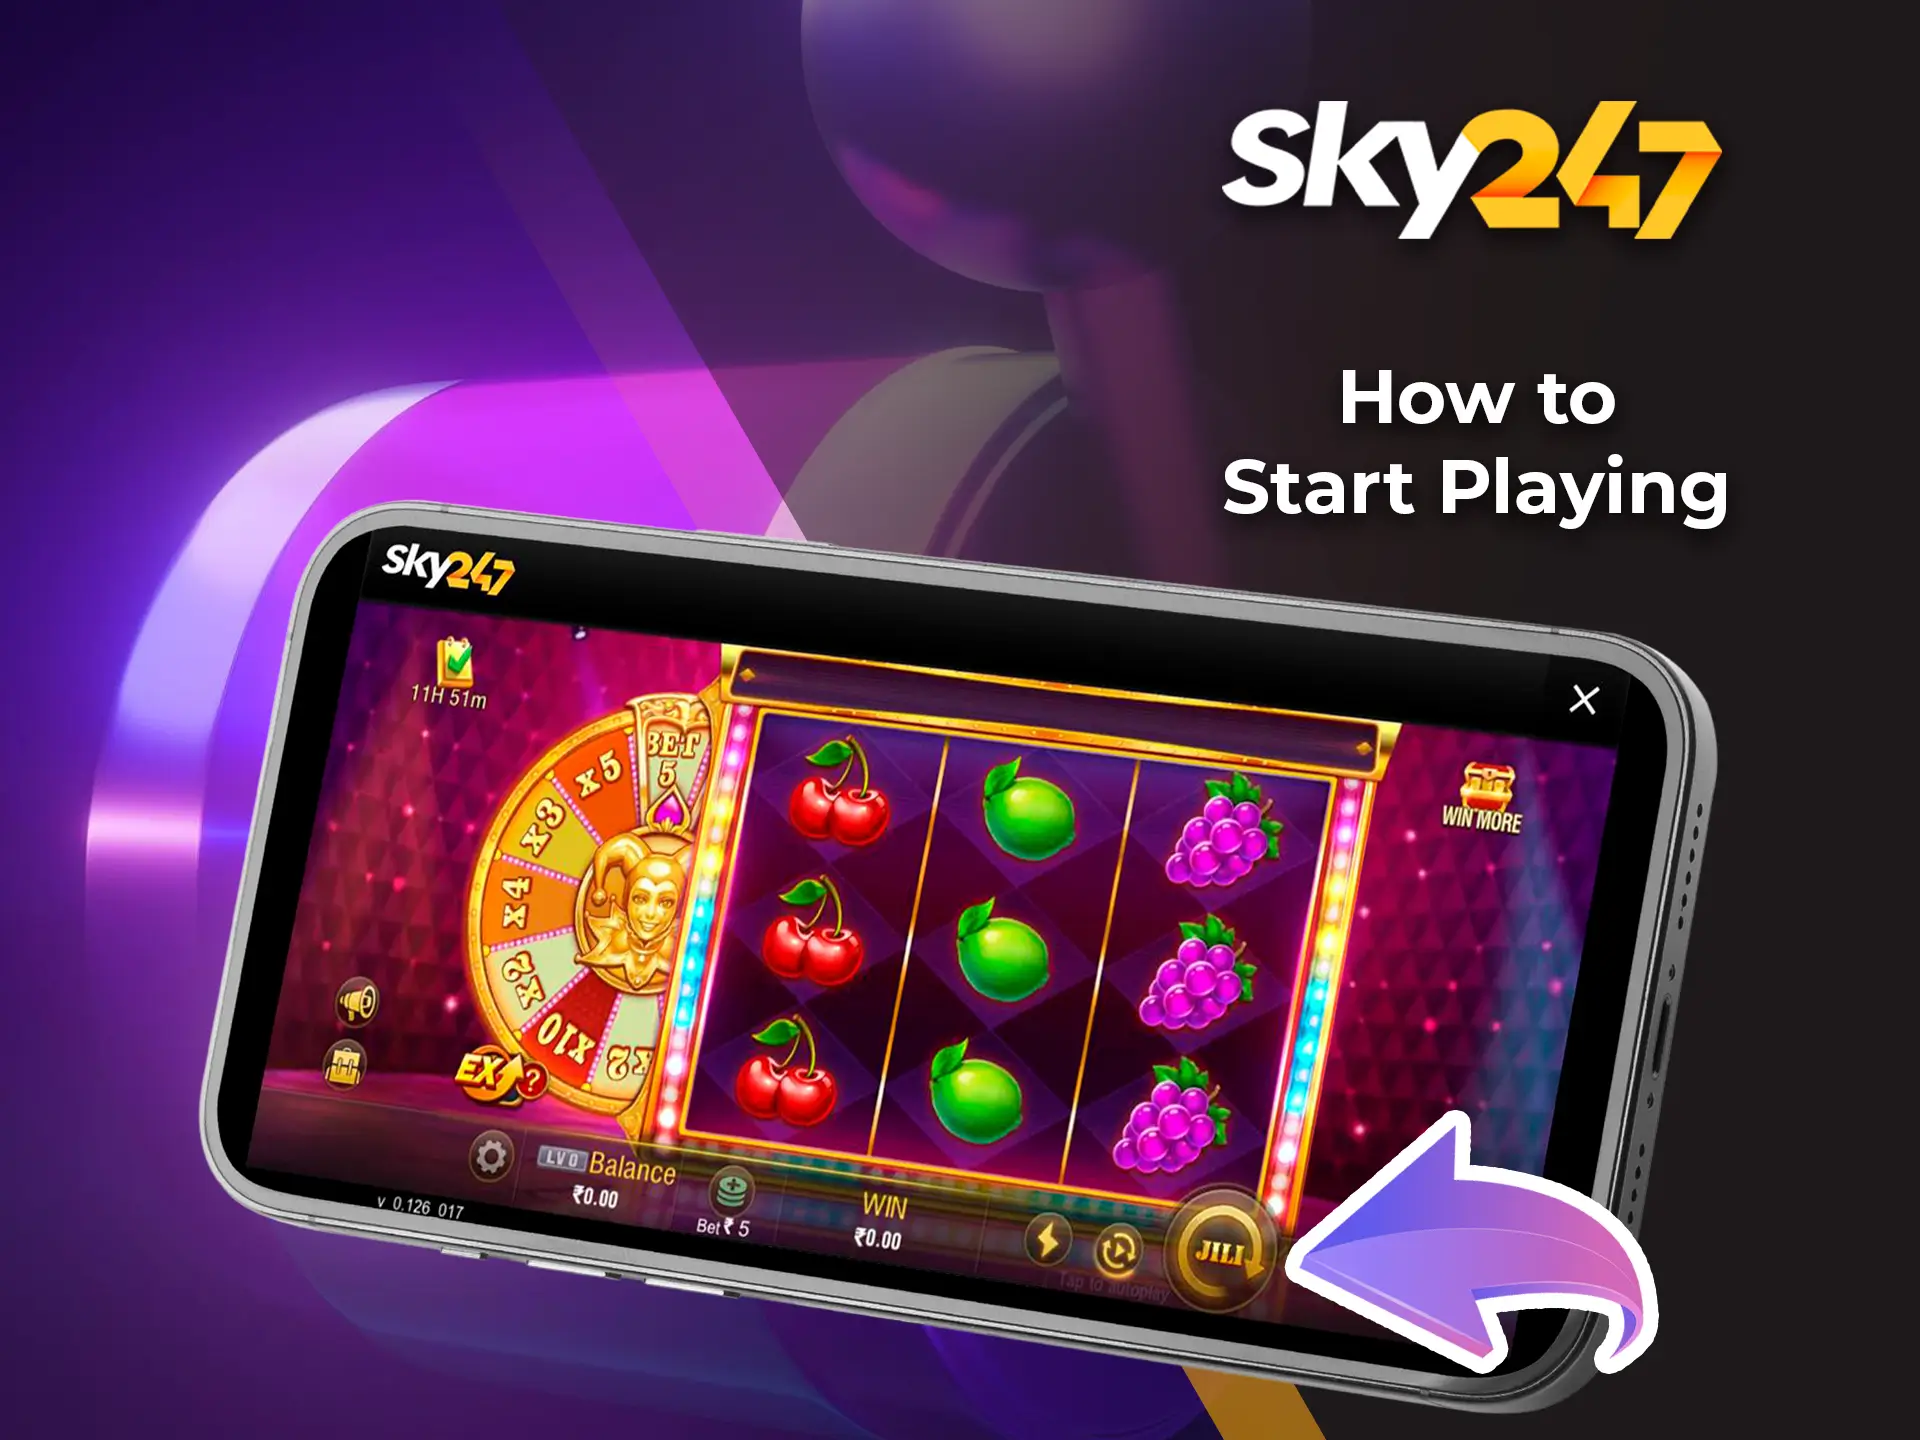 Sign up, take advantage of the bonus and start winning at the best slots from Sky247 Casino.